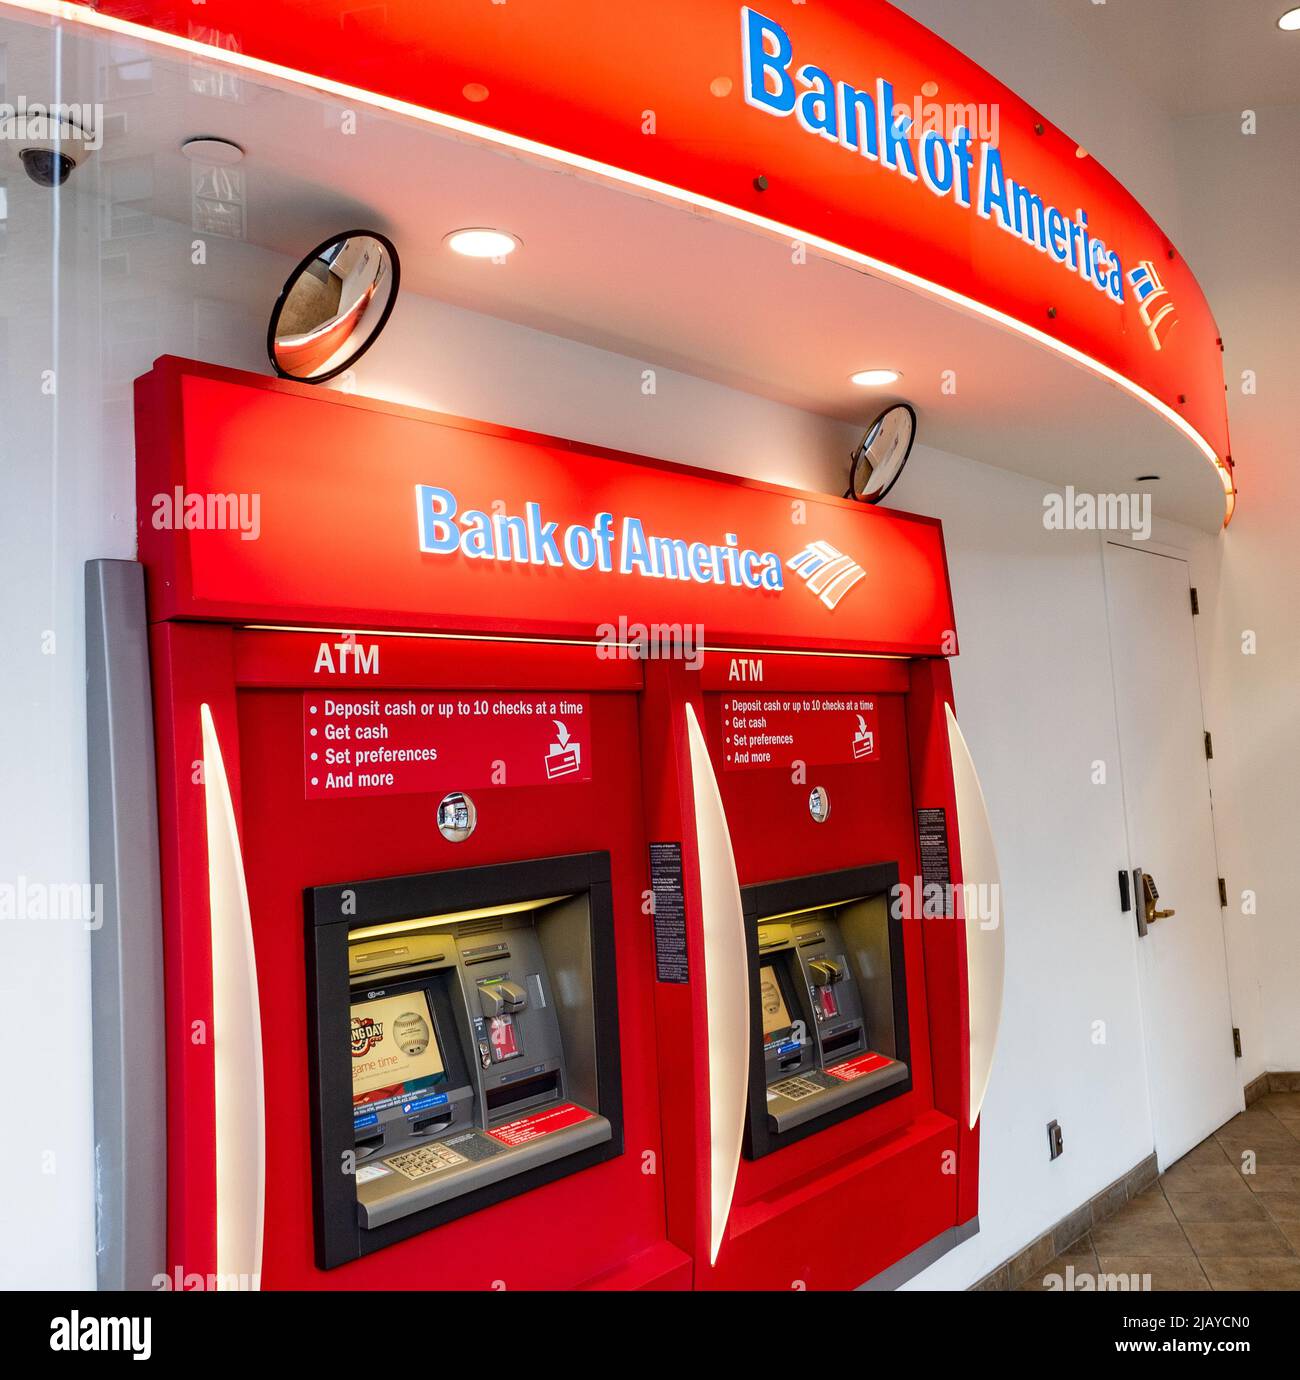 Bank of America ATM Automated Teller Machine with logo Stock Photo